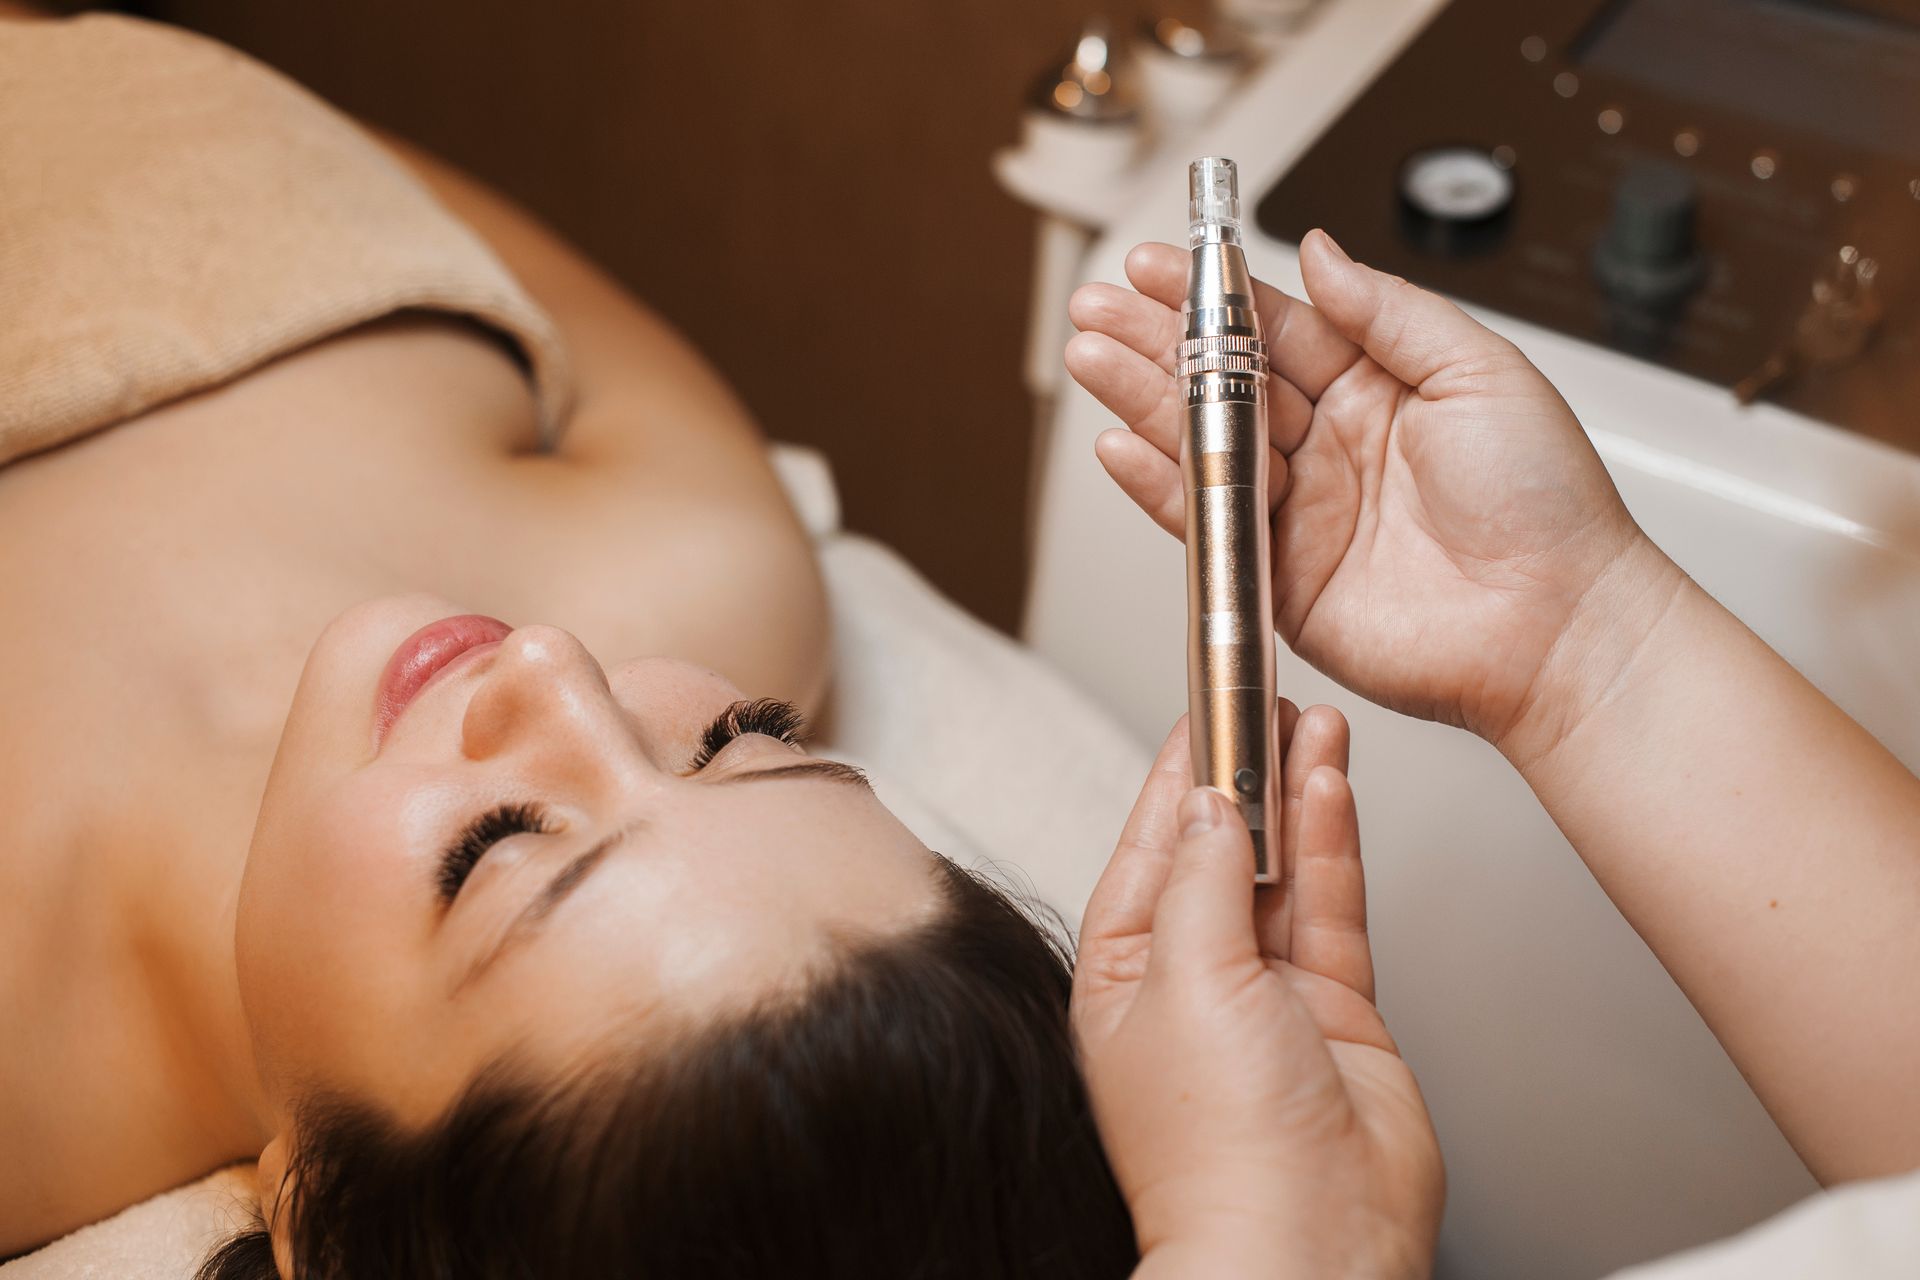 a woman is laying on a bed while a person holds a device that says ' ipl ' on it